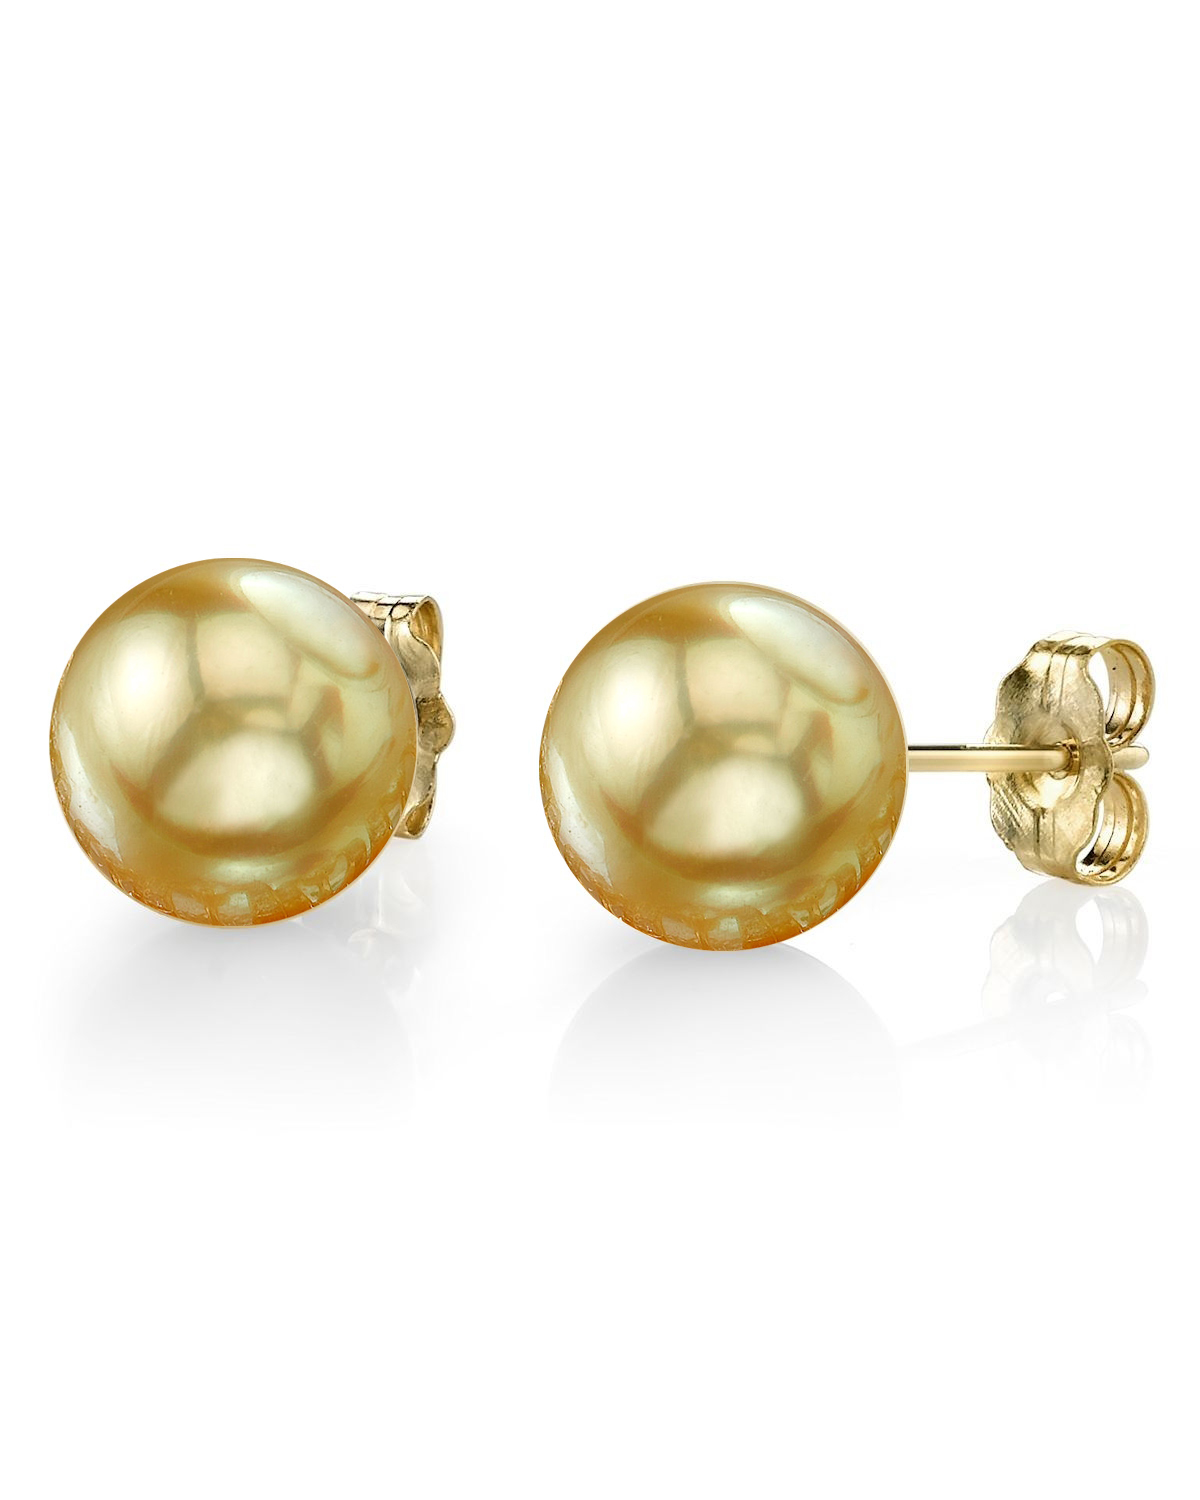 7mm Golden South Sea Round Pearl Stud Earrings